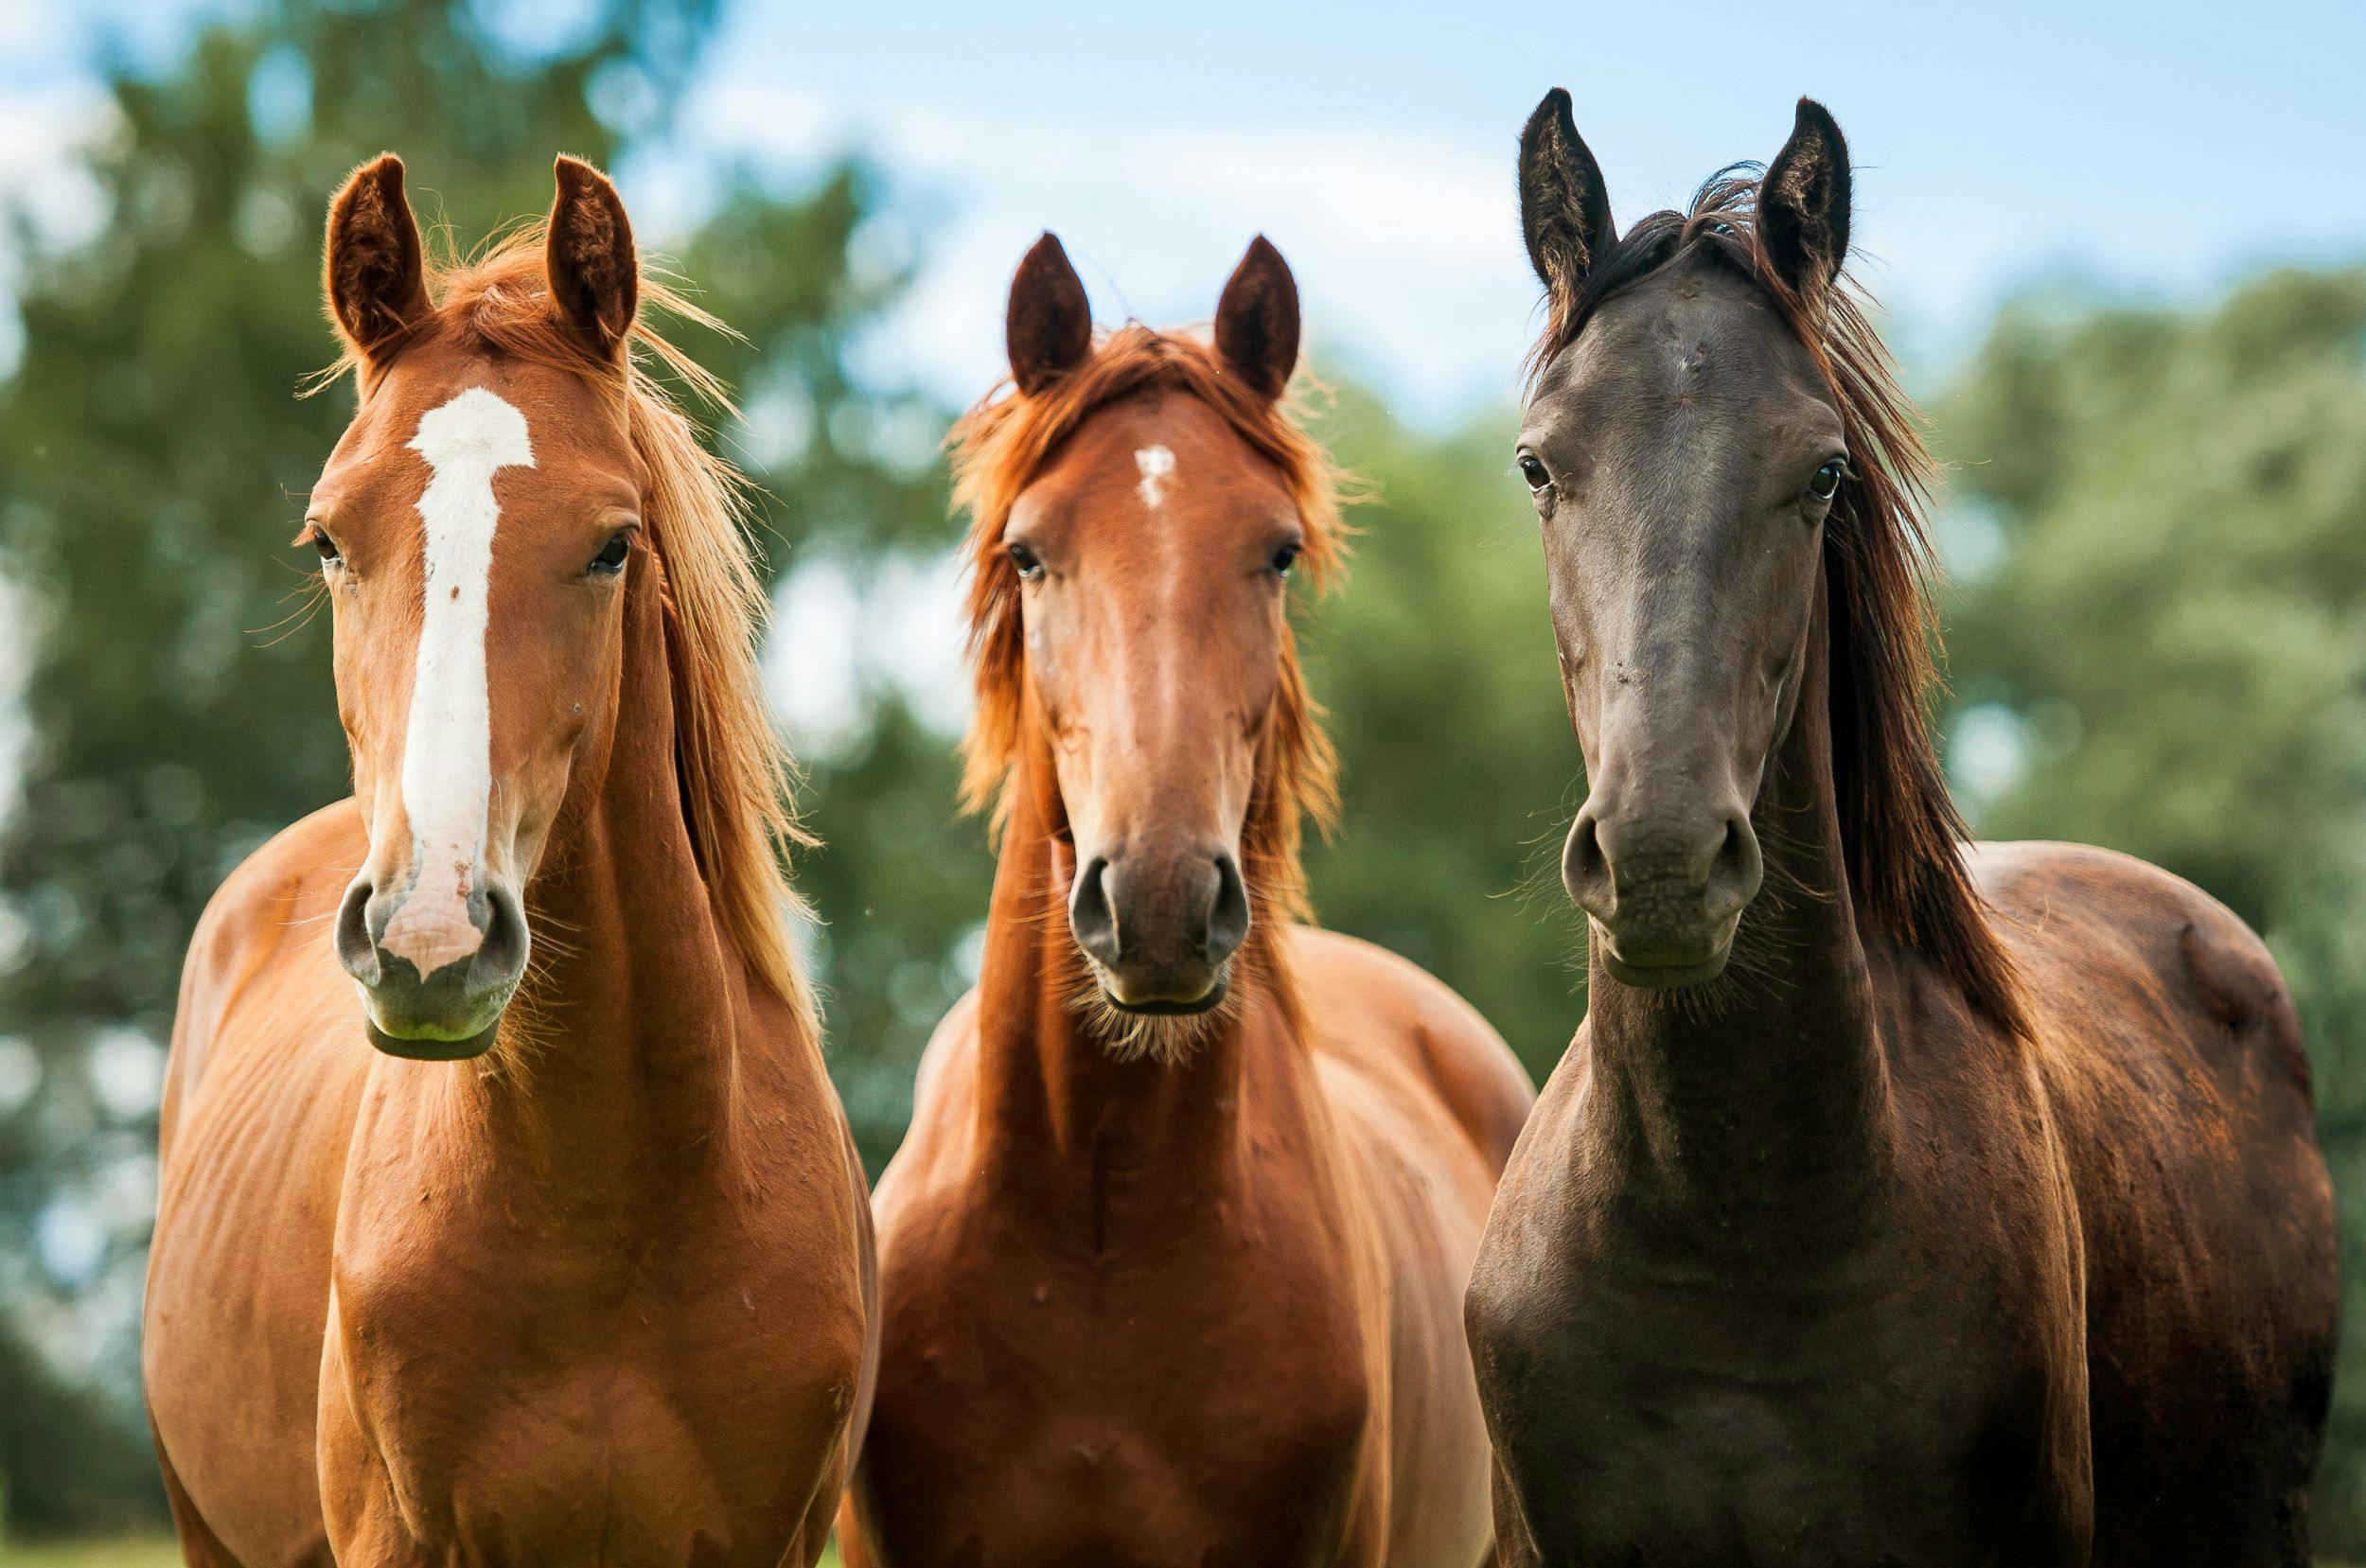 Hold your horses: External factors that influence circadian rhythms in horses